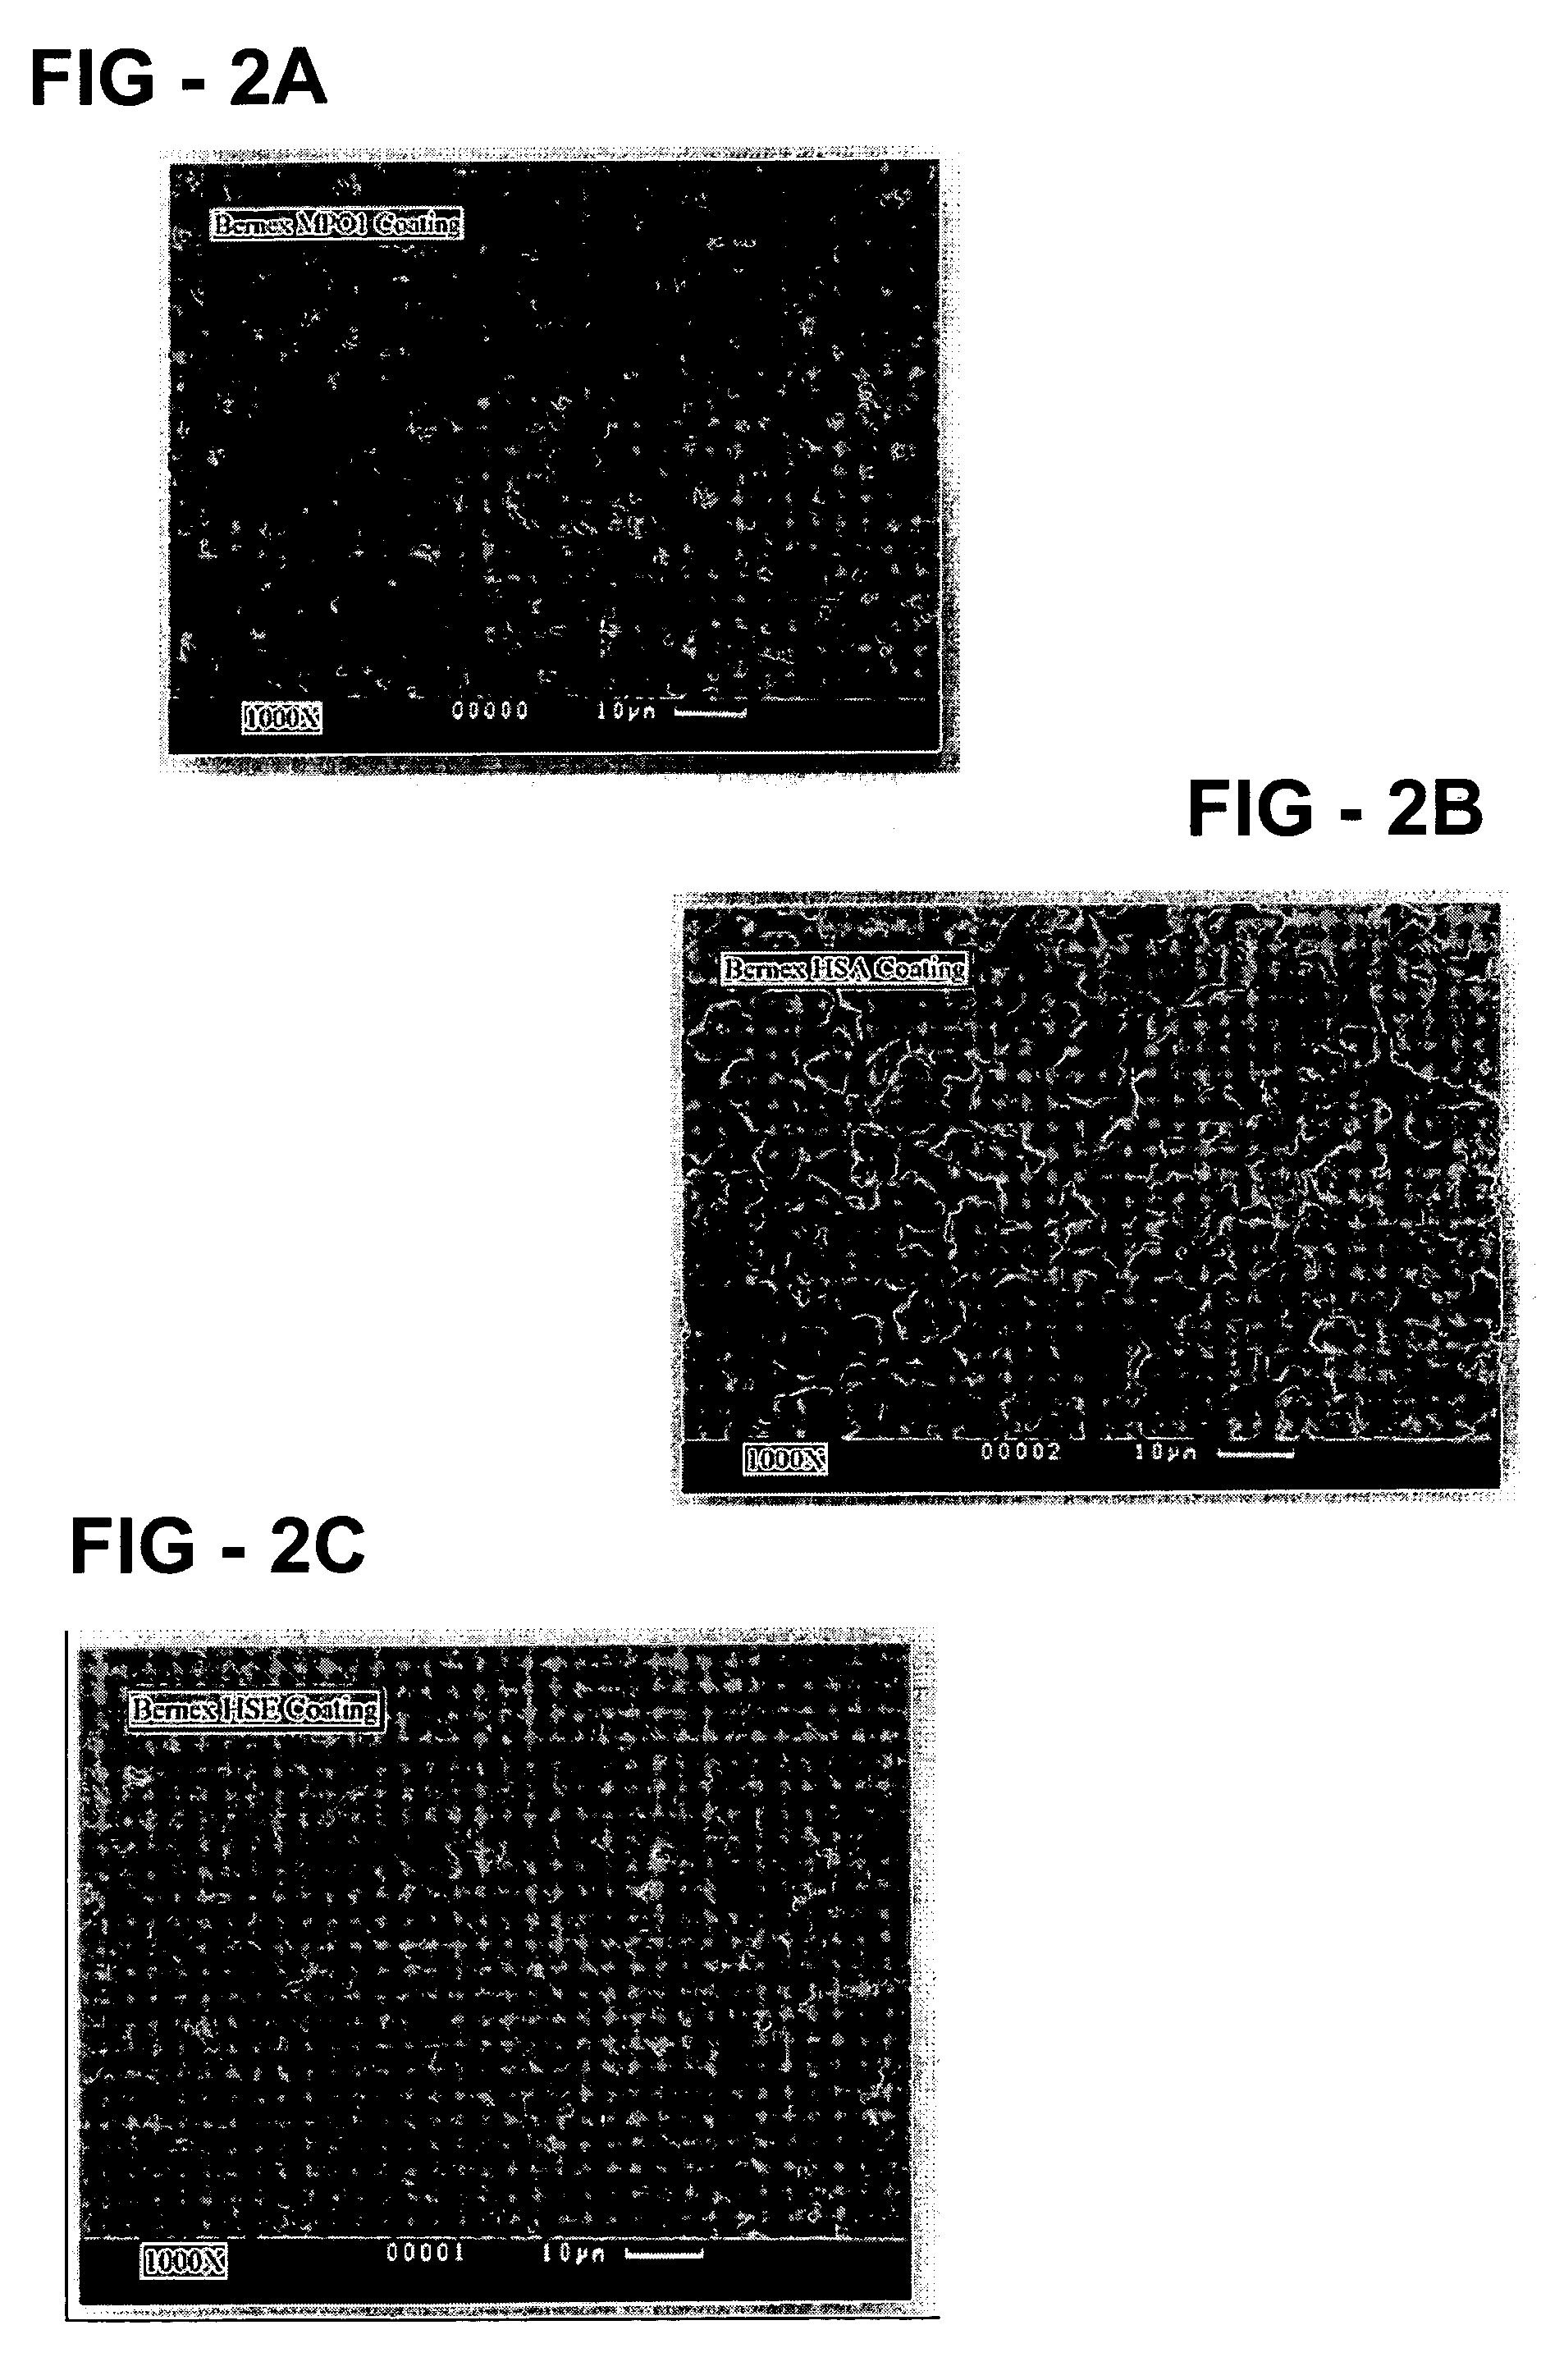 Dual layer diffusion bonded chemical vapor coating for medical implants